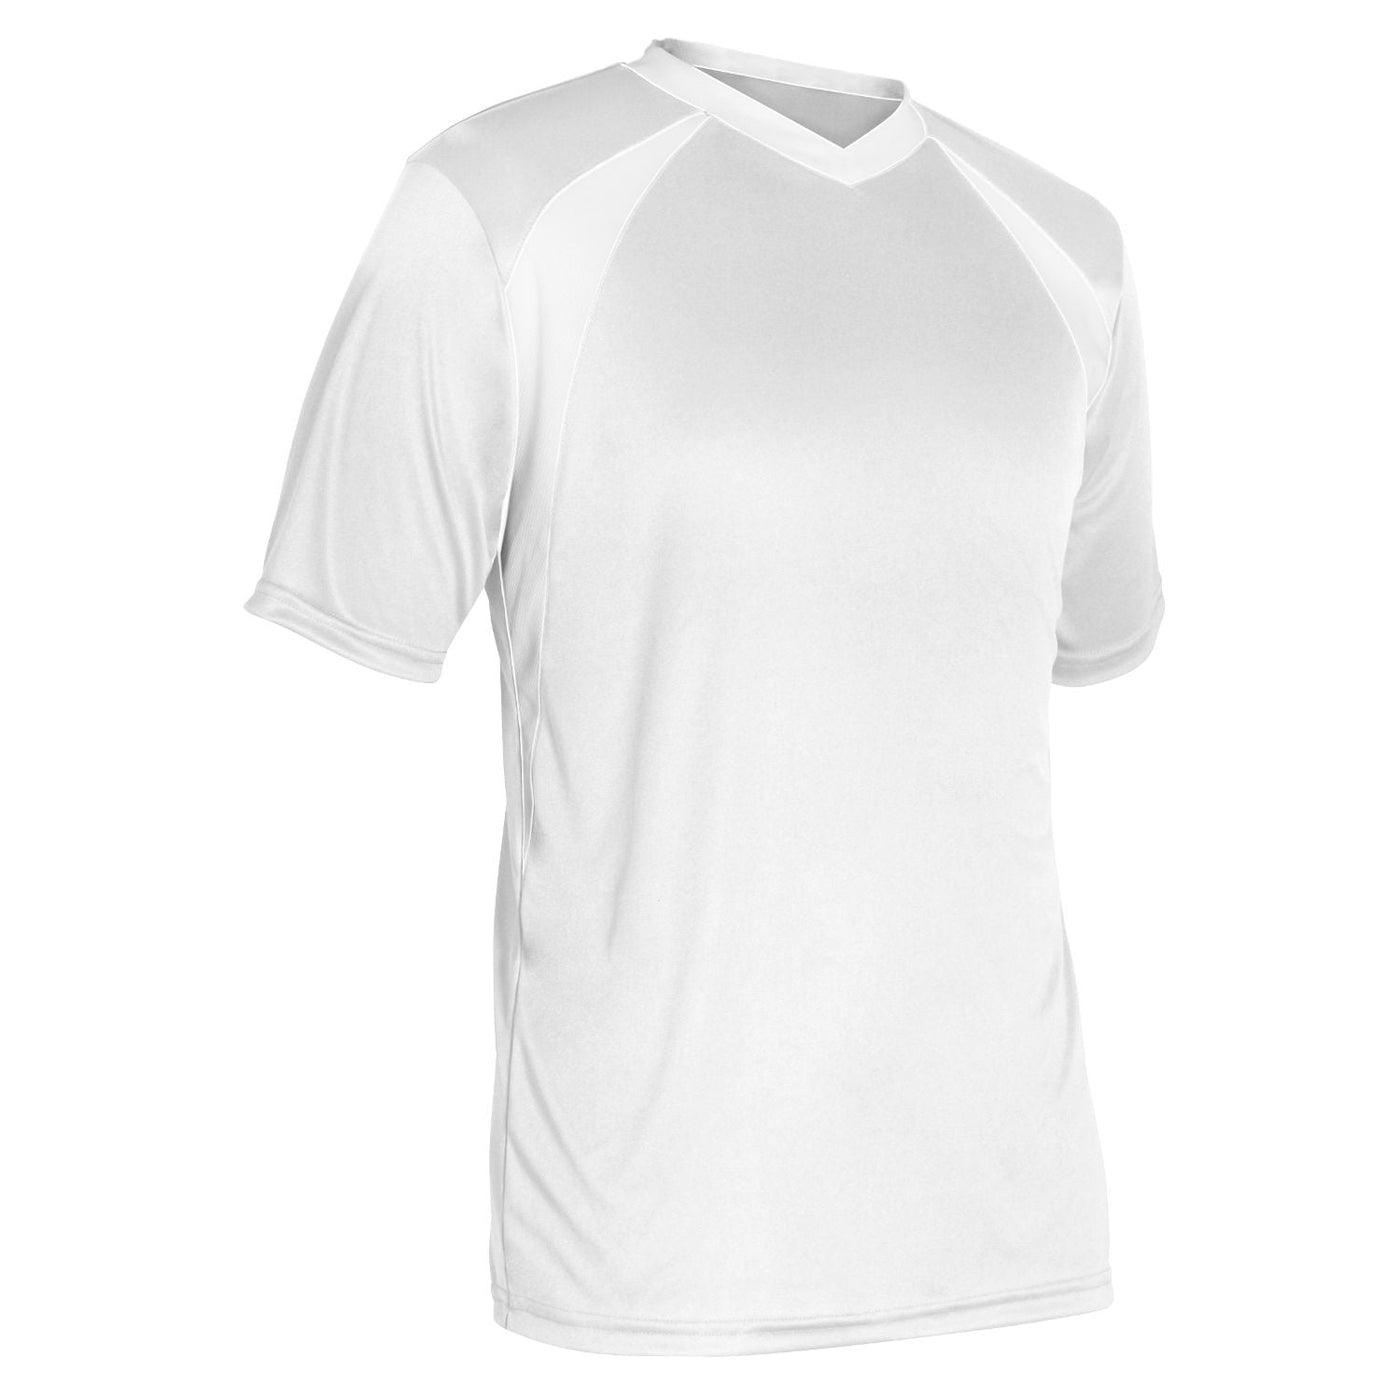 Champro Champro Adult Sweeper Soccer Jersey White White Extra Large / White/White Sports